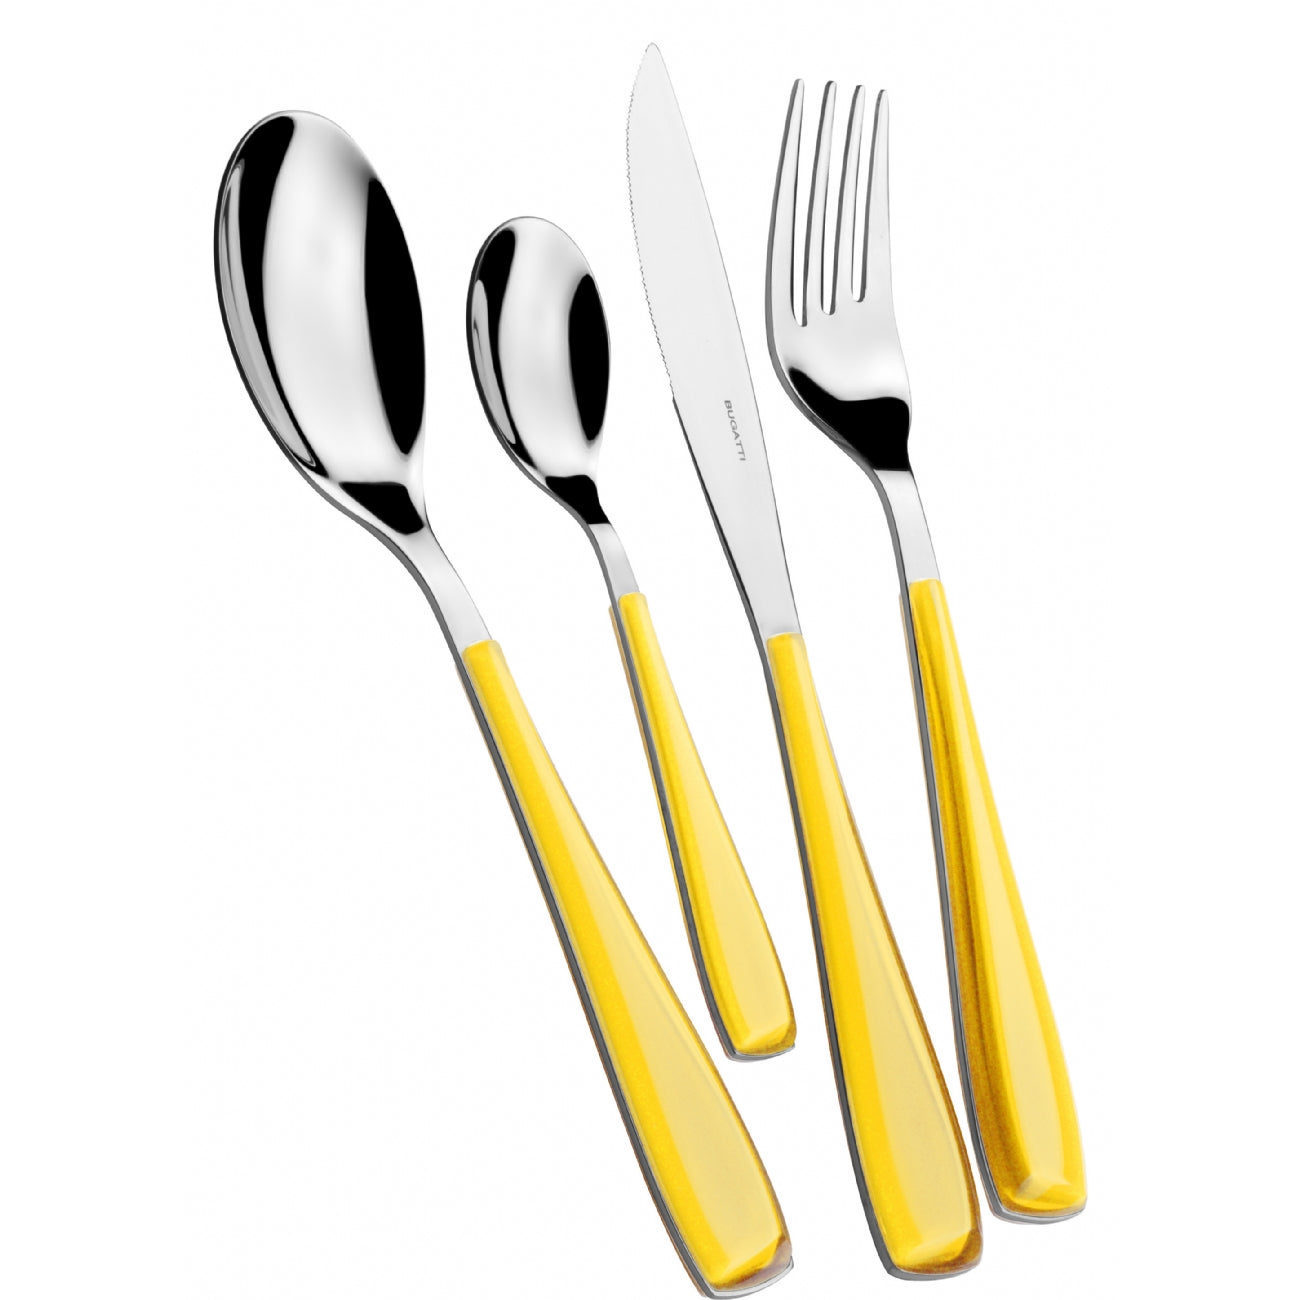 BUGATTI, Essenza, 24 Piece Cutlery Set in 18/10 Stainless Steel and Yellow Handle. Cutlery Set for 6 People Consisting of 6 Spoons, 6 Forks, 6 Knives and 6 Coffee Spoons